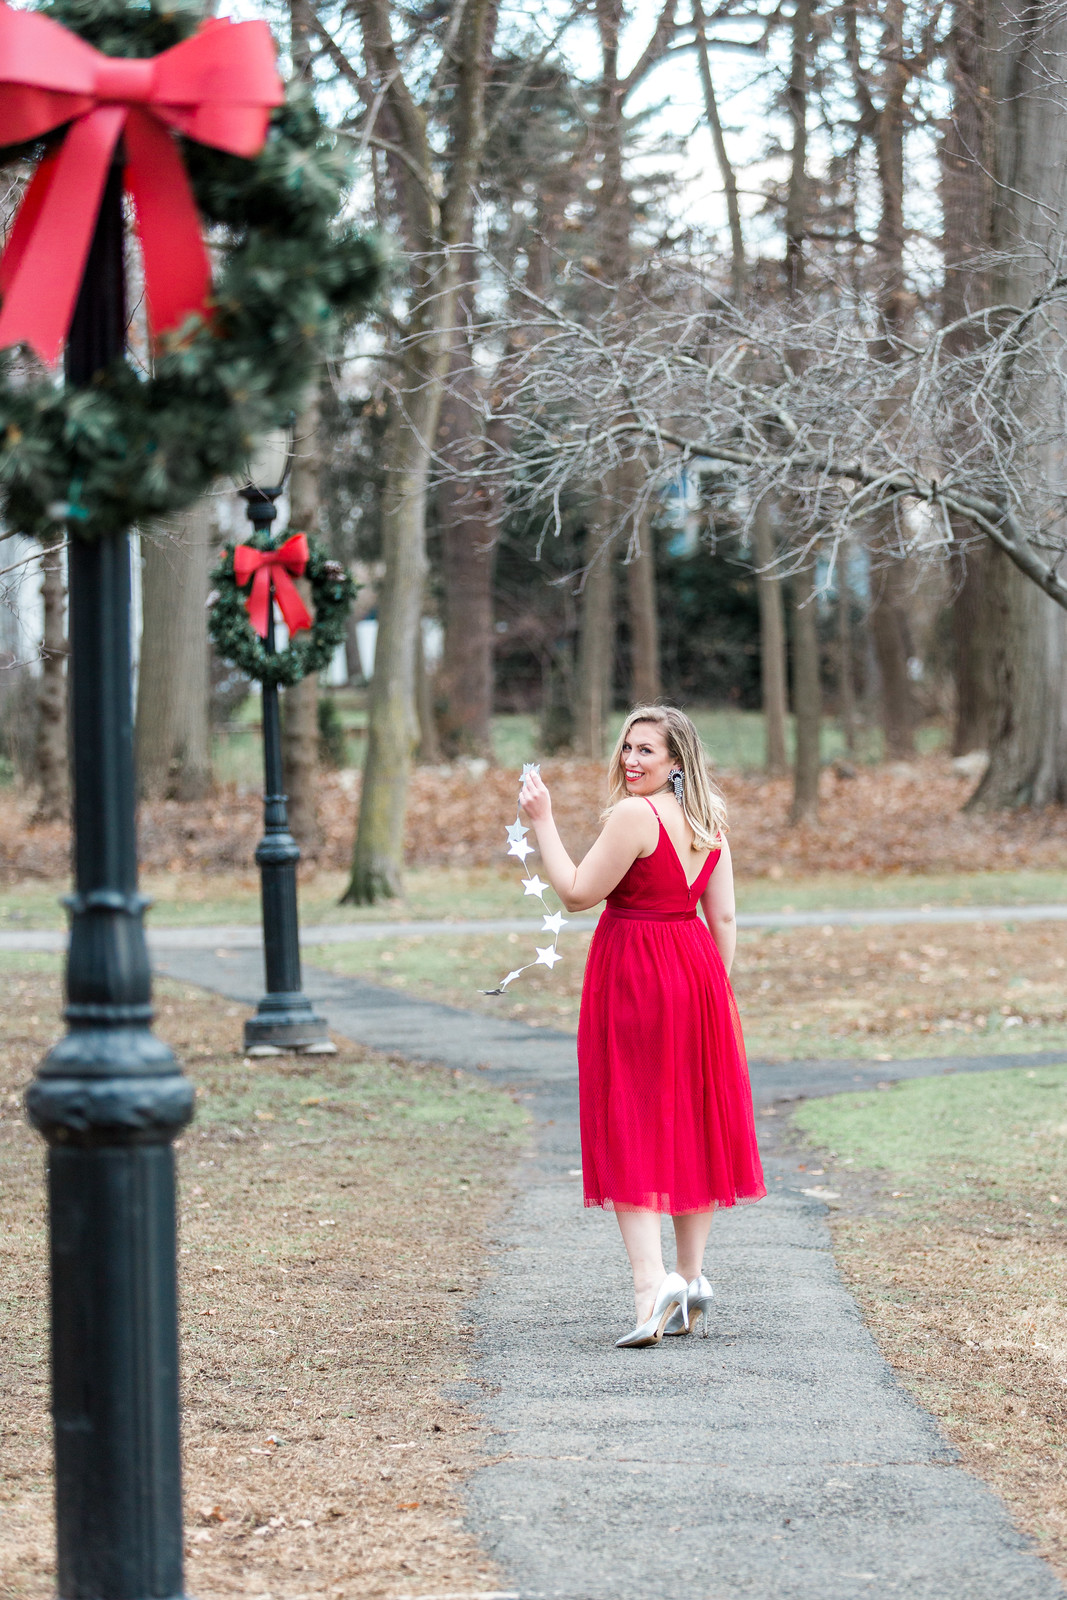 Twirling in Tulle for Christmas | Red Tulle Midi Dress Christmas Holiday Outfit Fashion